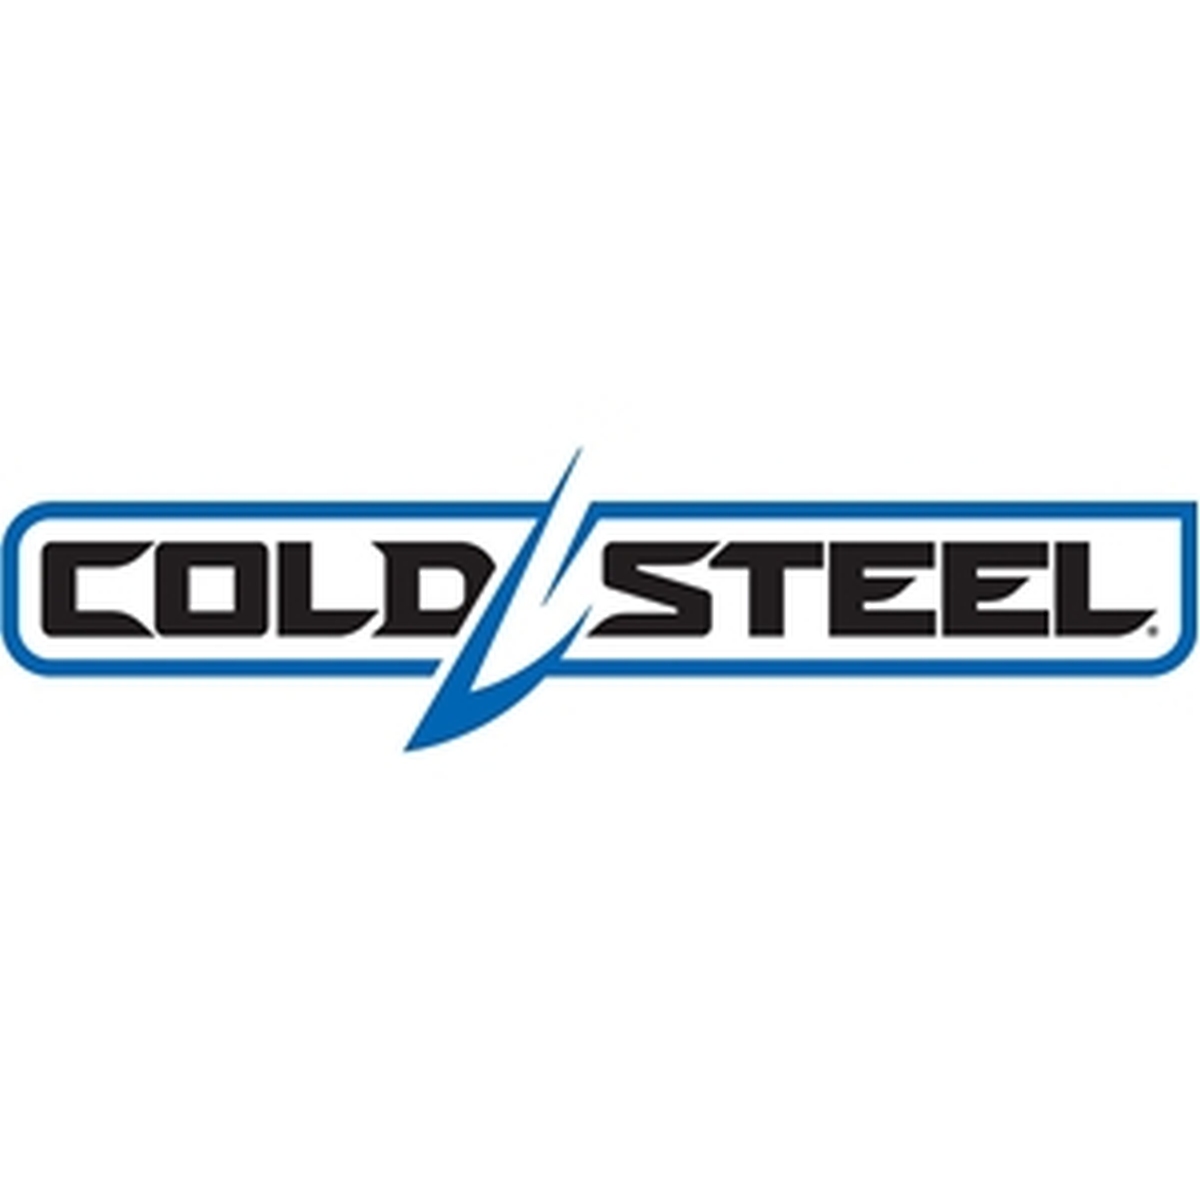 Cold steel